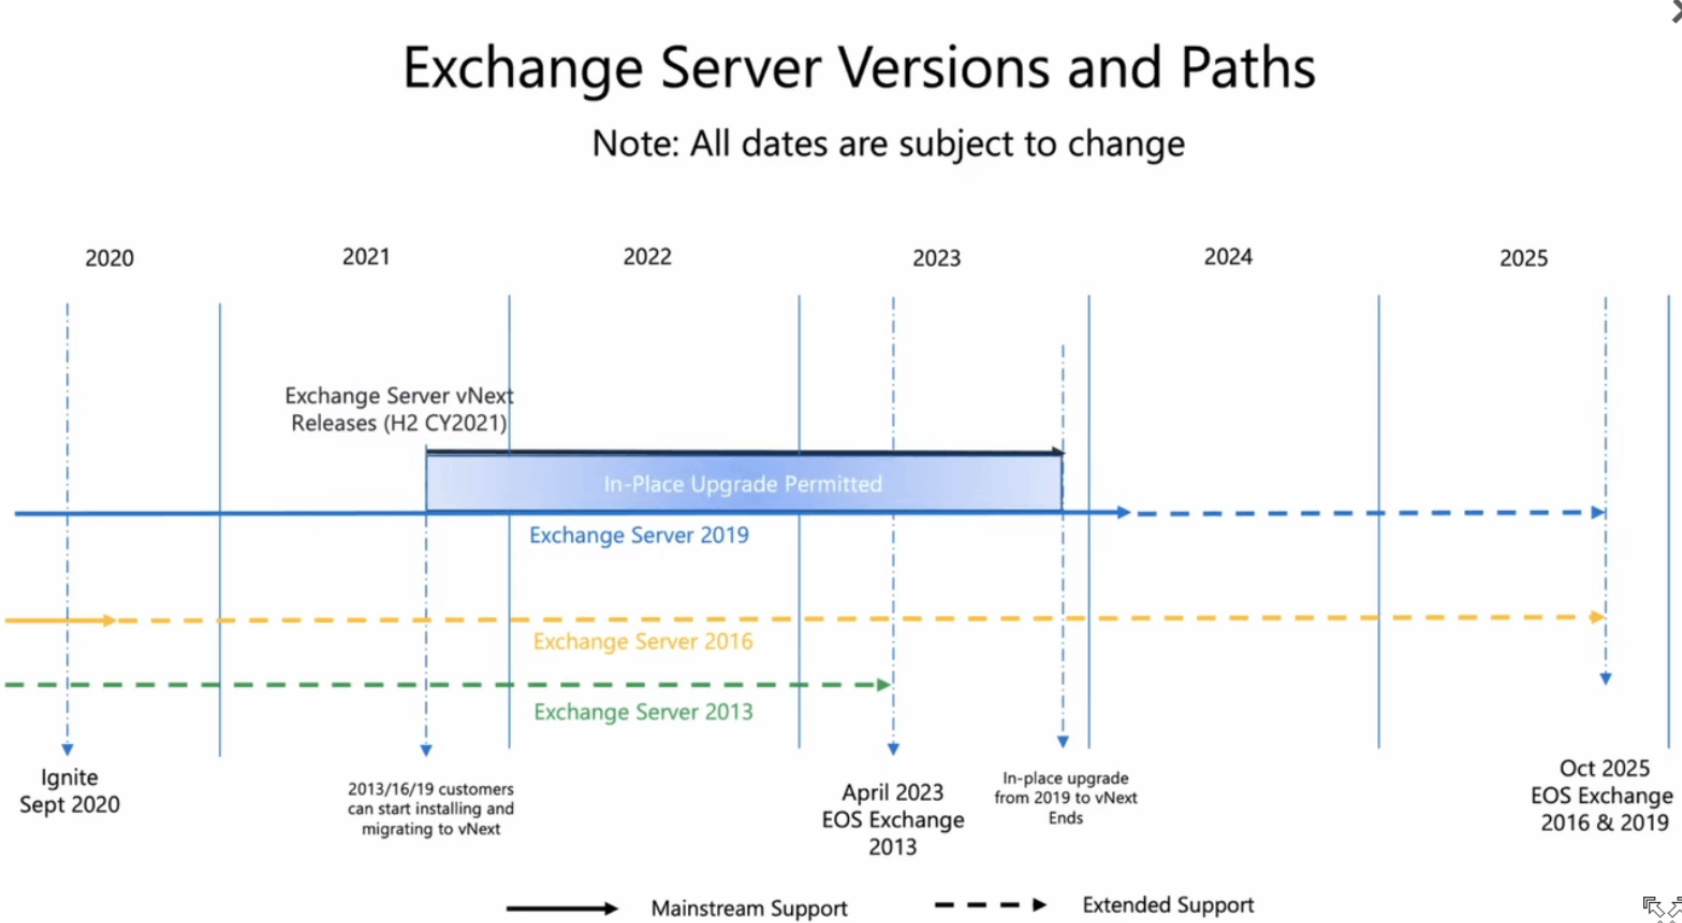 Exchange Server Versions and Paths